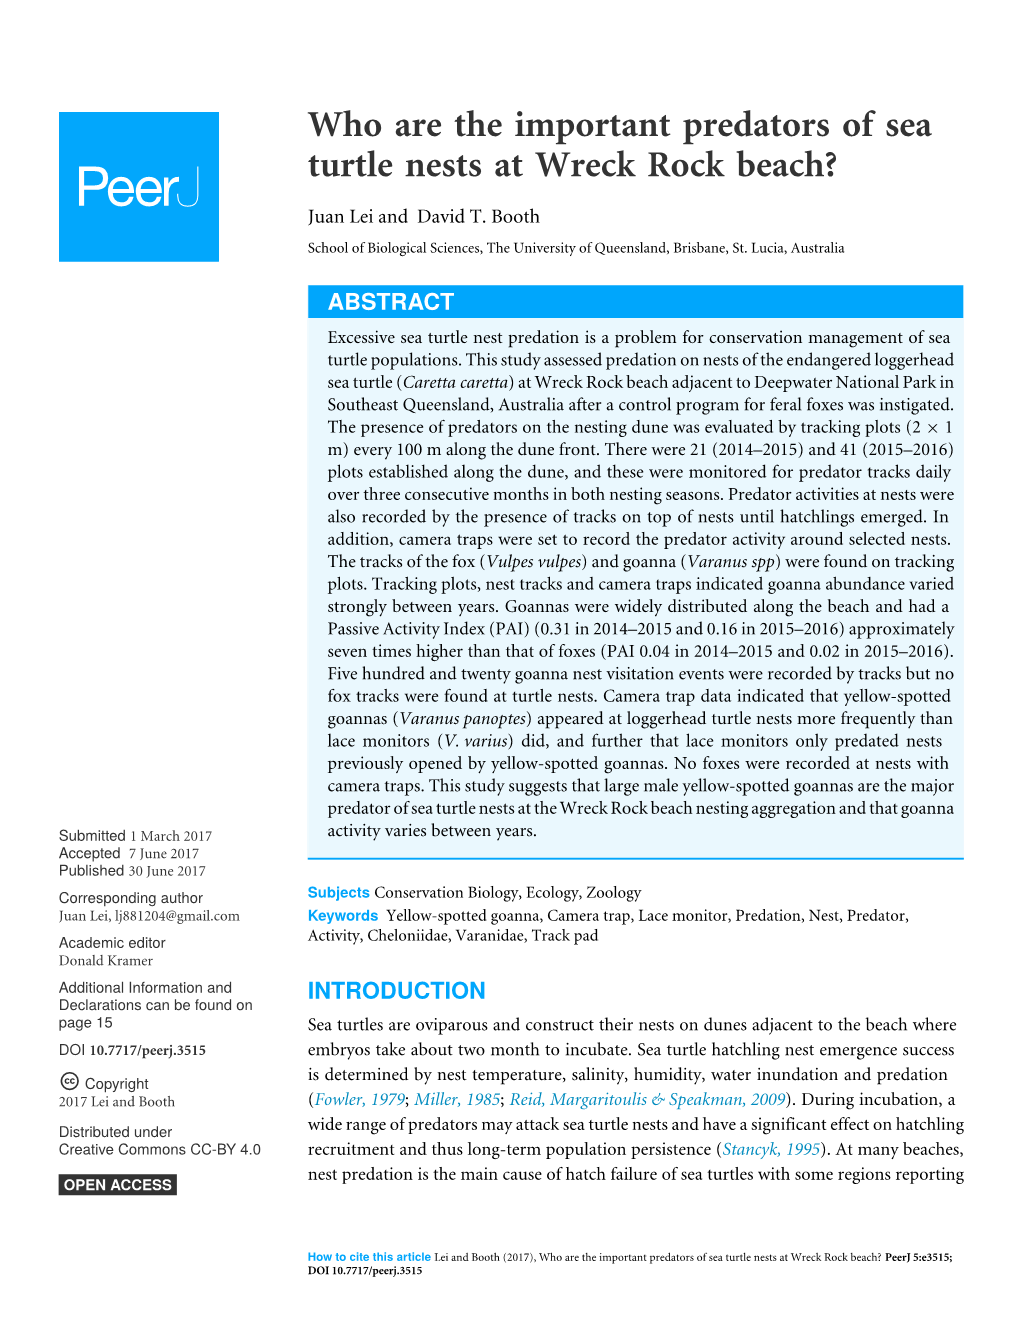 Who Are the Important Predators of Sea Turtle Nests at Wreck Rock Beach?